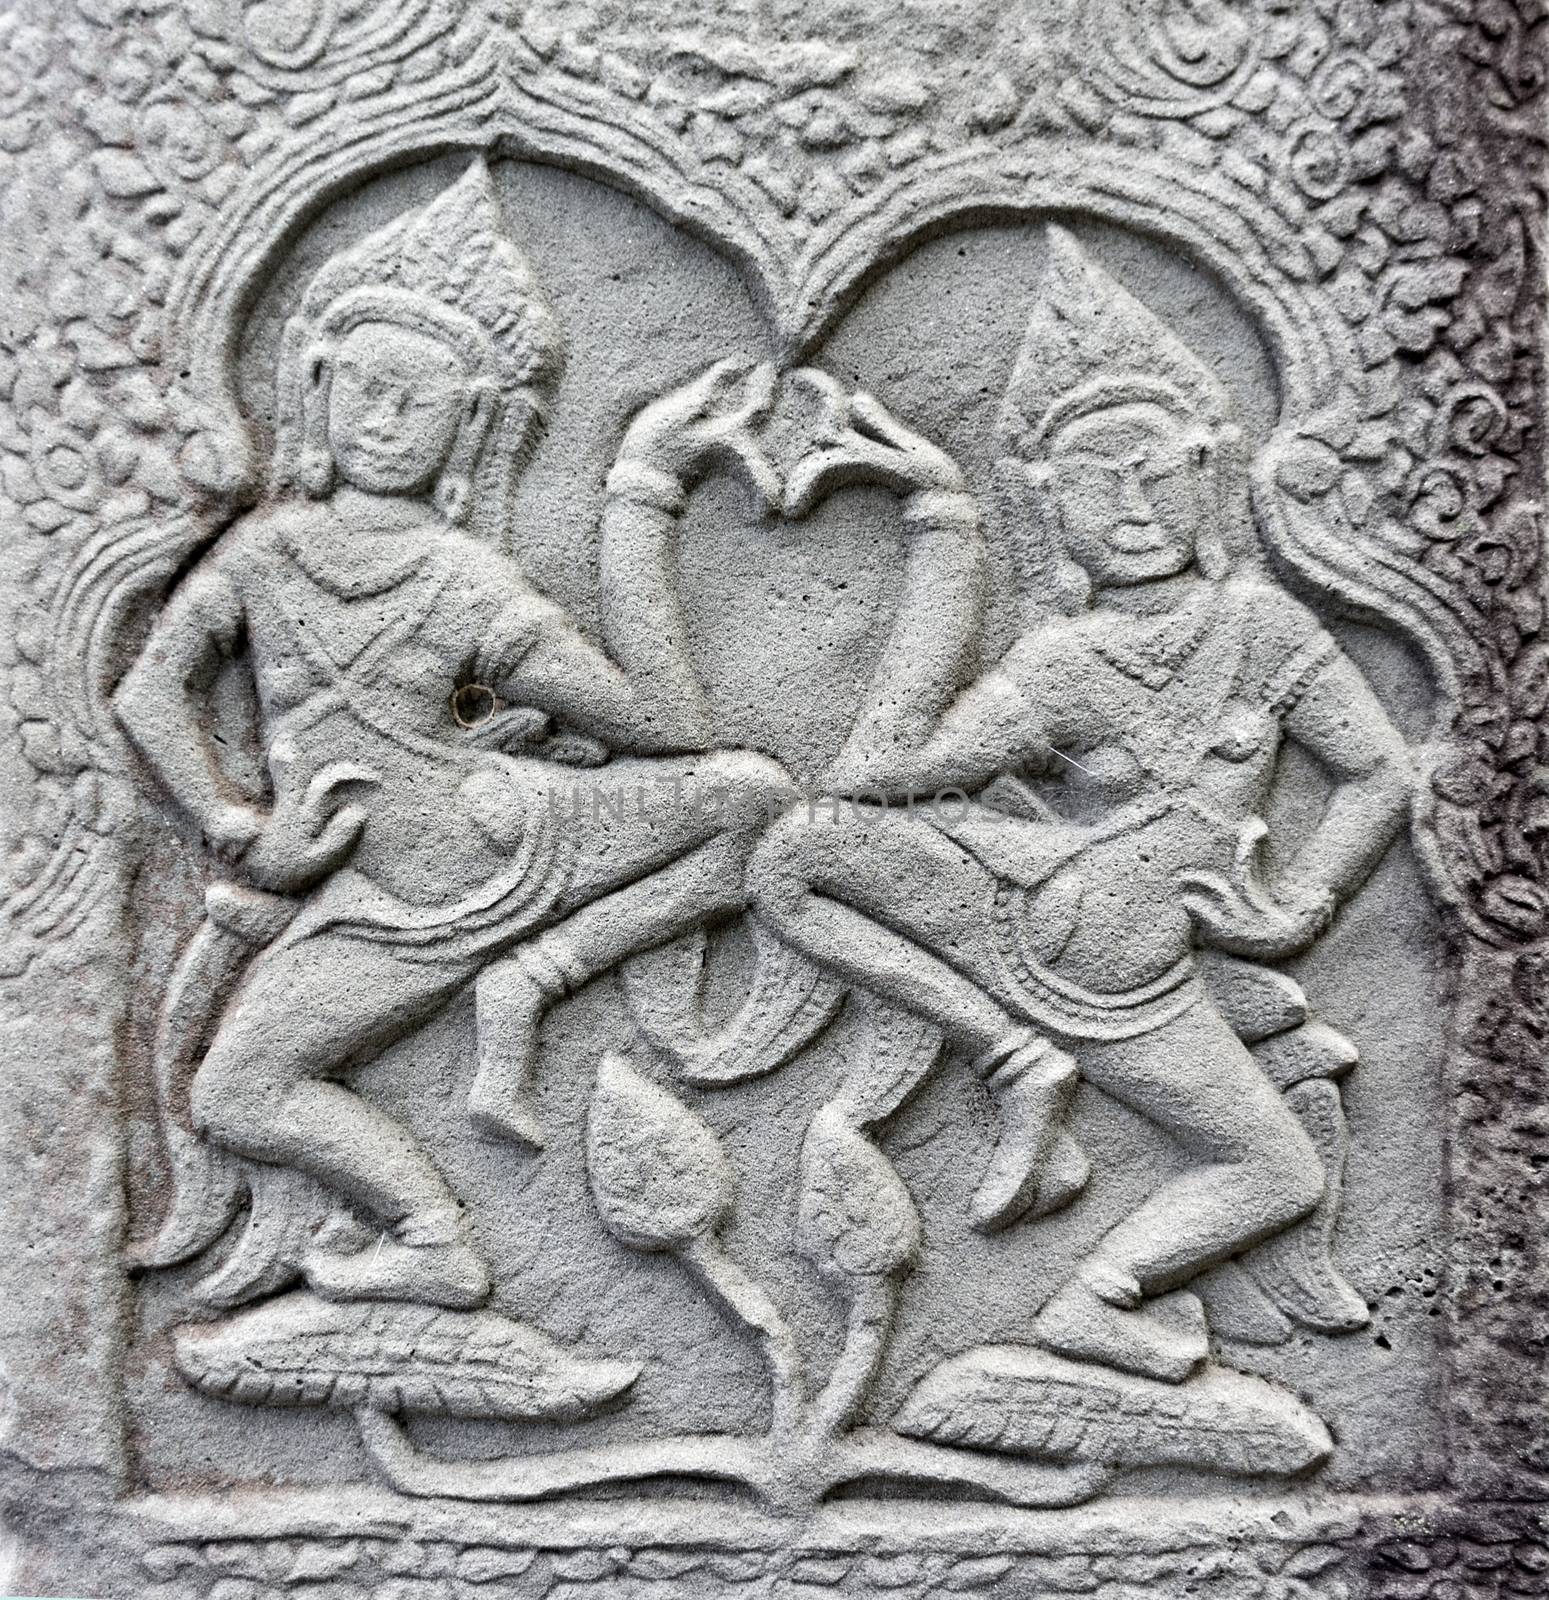 Bas-relief of an ancient temple Angkor